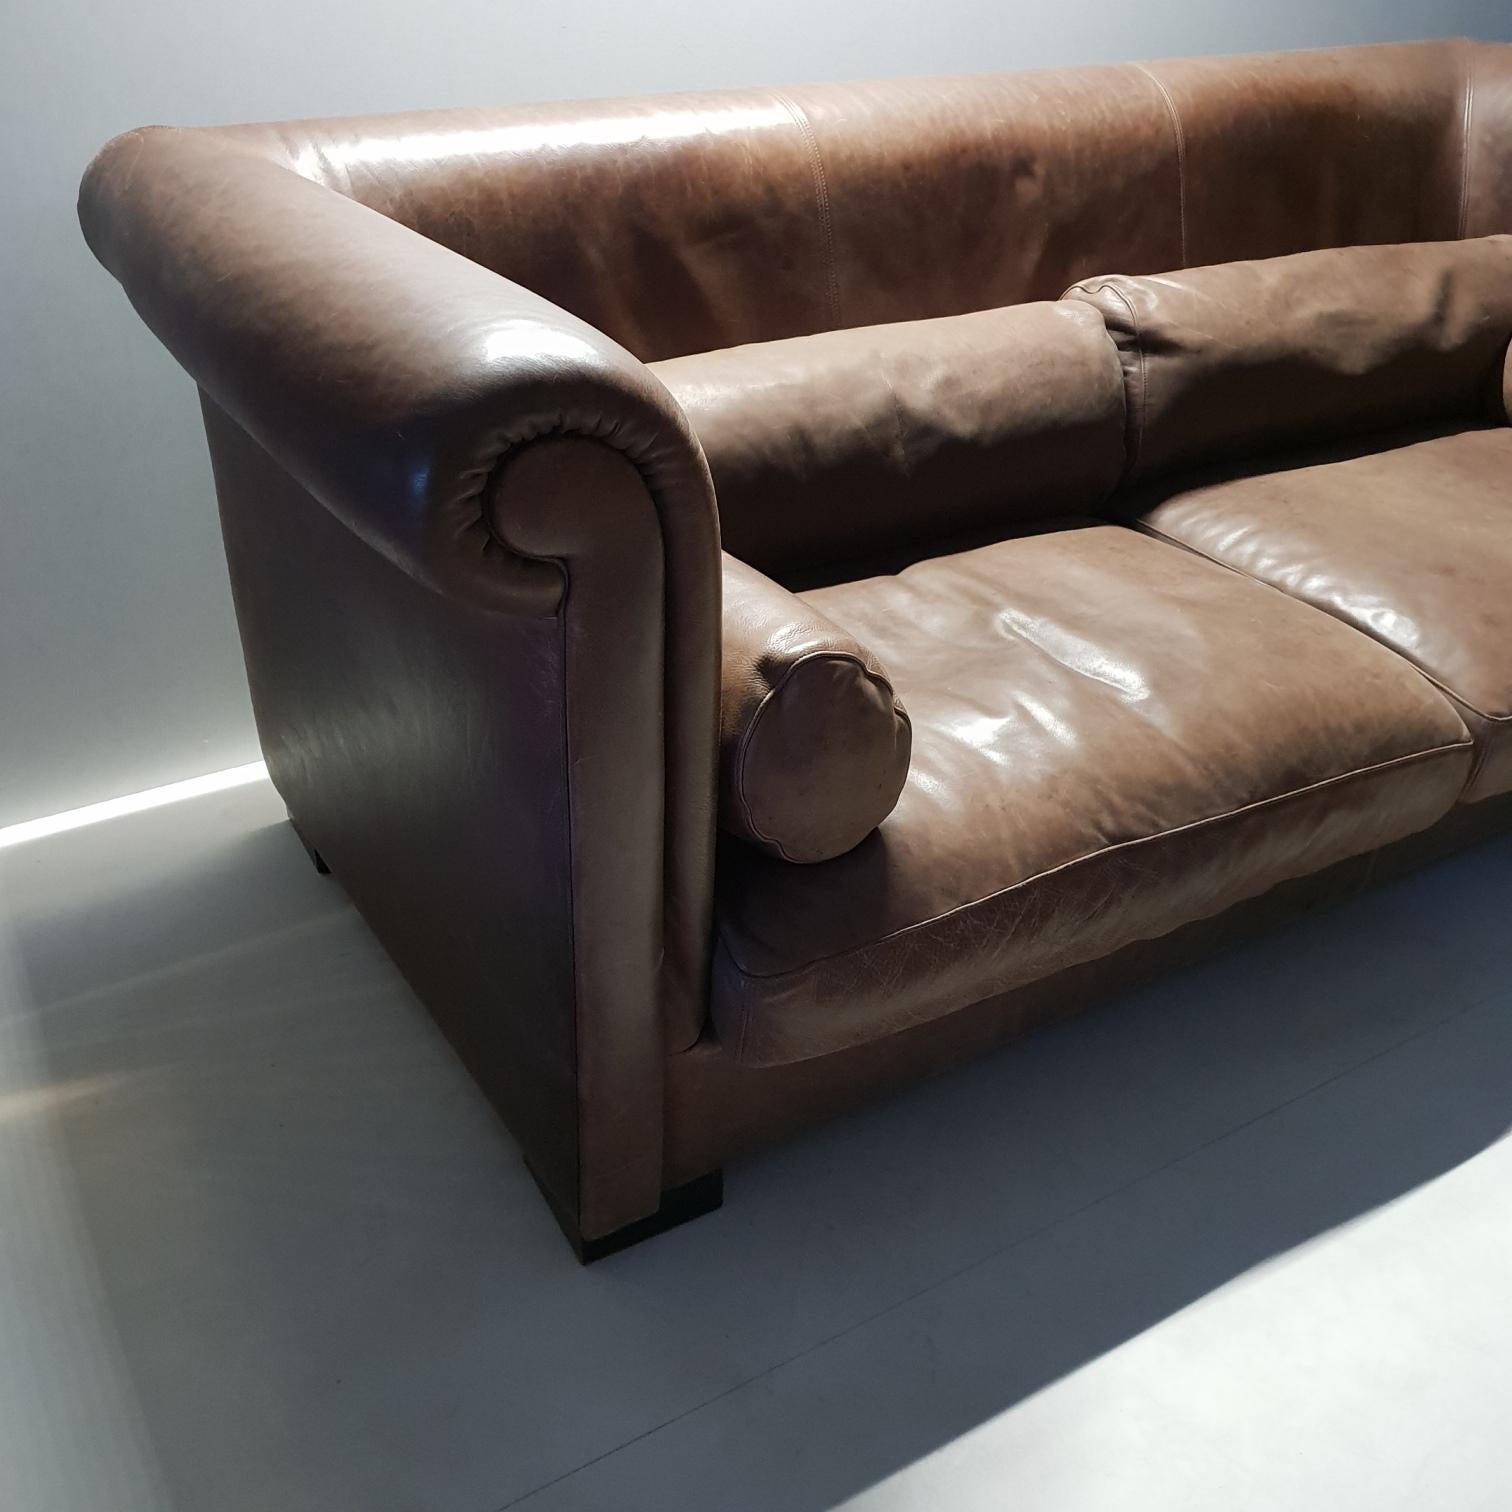 Baxter Alfred Couches - For Sale on 1stDibs | baxter alfred sofa